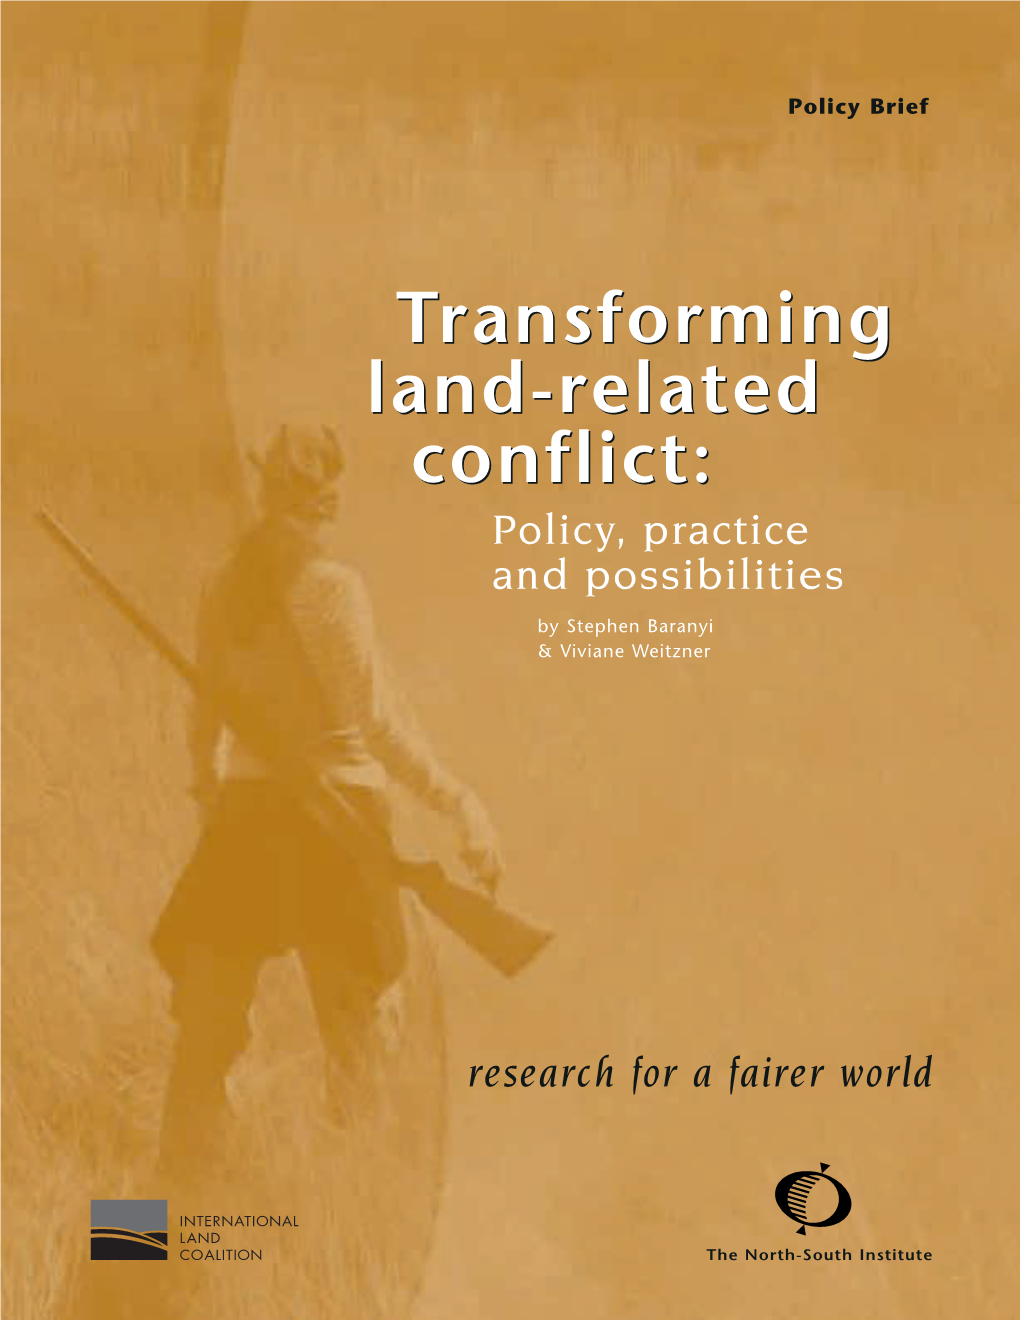 “Transforming Land-Related Conflict Policy, Practice and Possibilities”